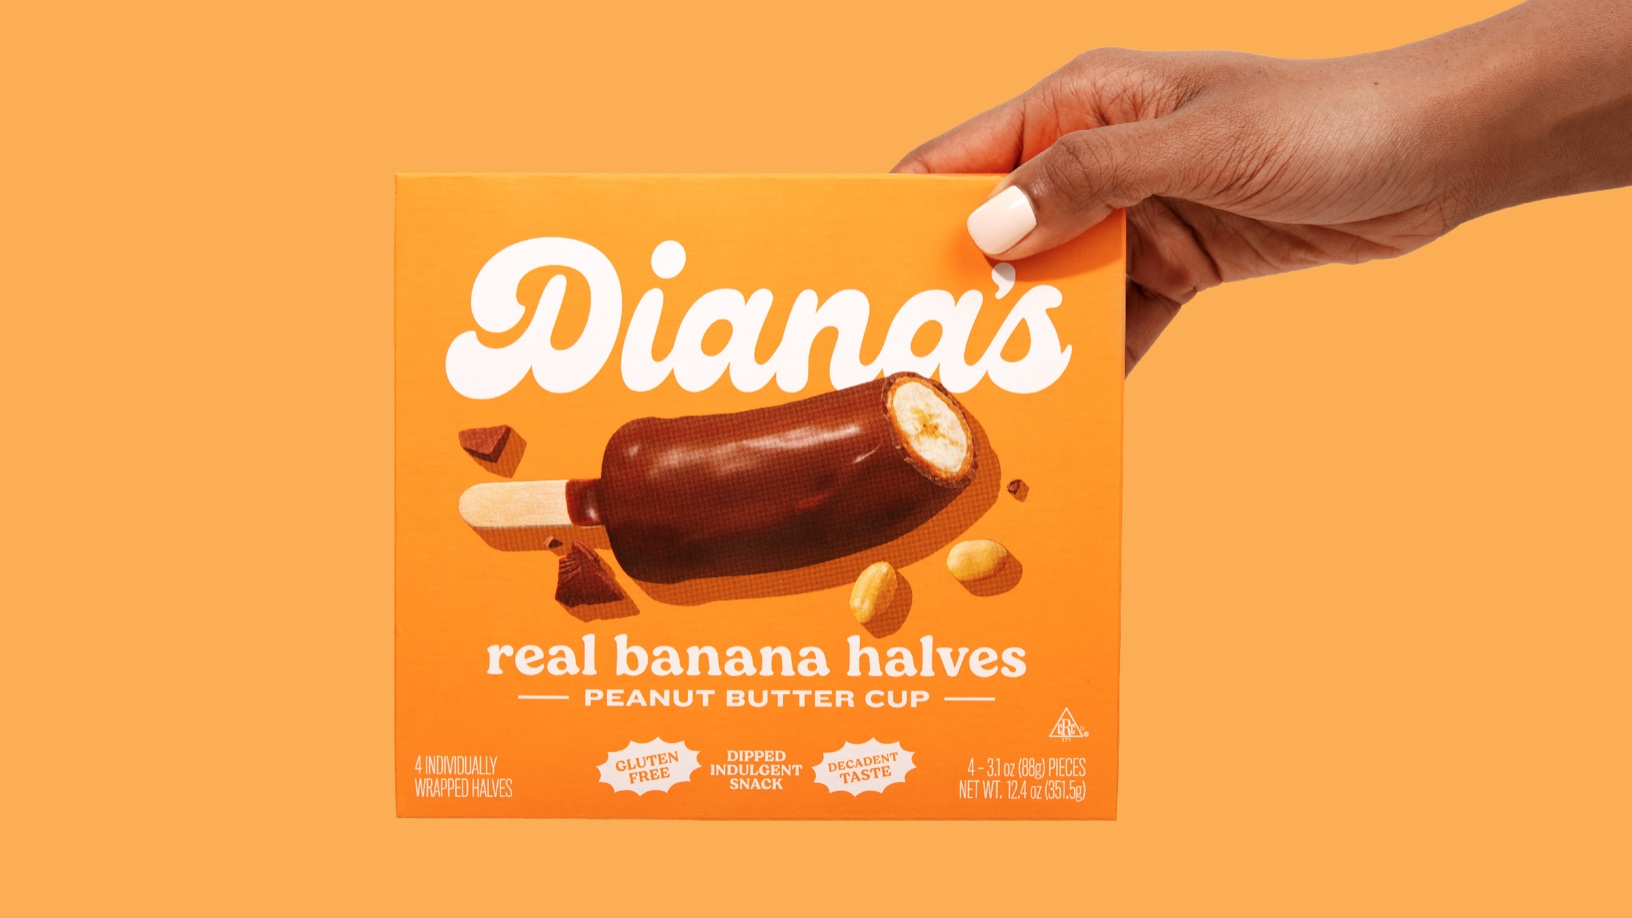 Diana’s Bananas Gets A Sweet New Look Designed By Interact